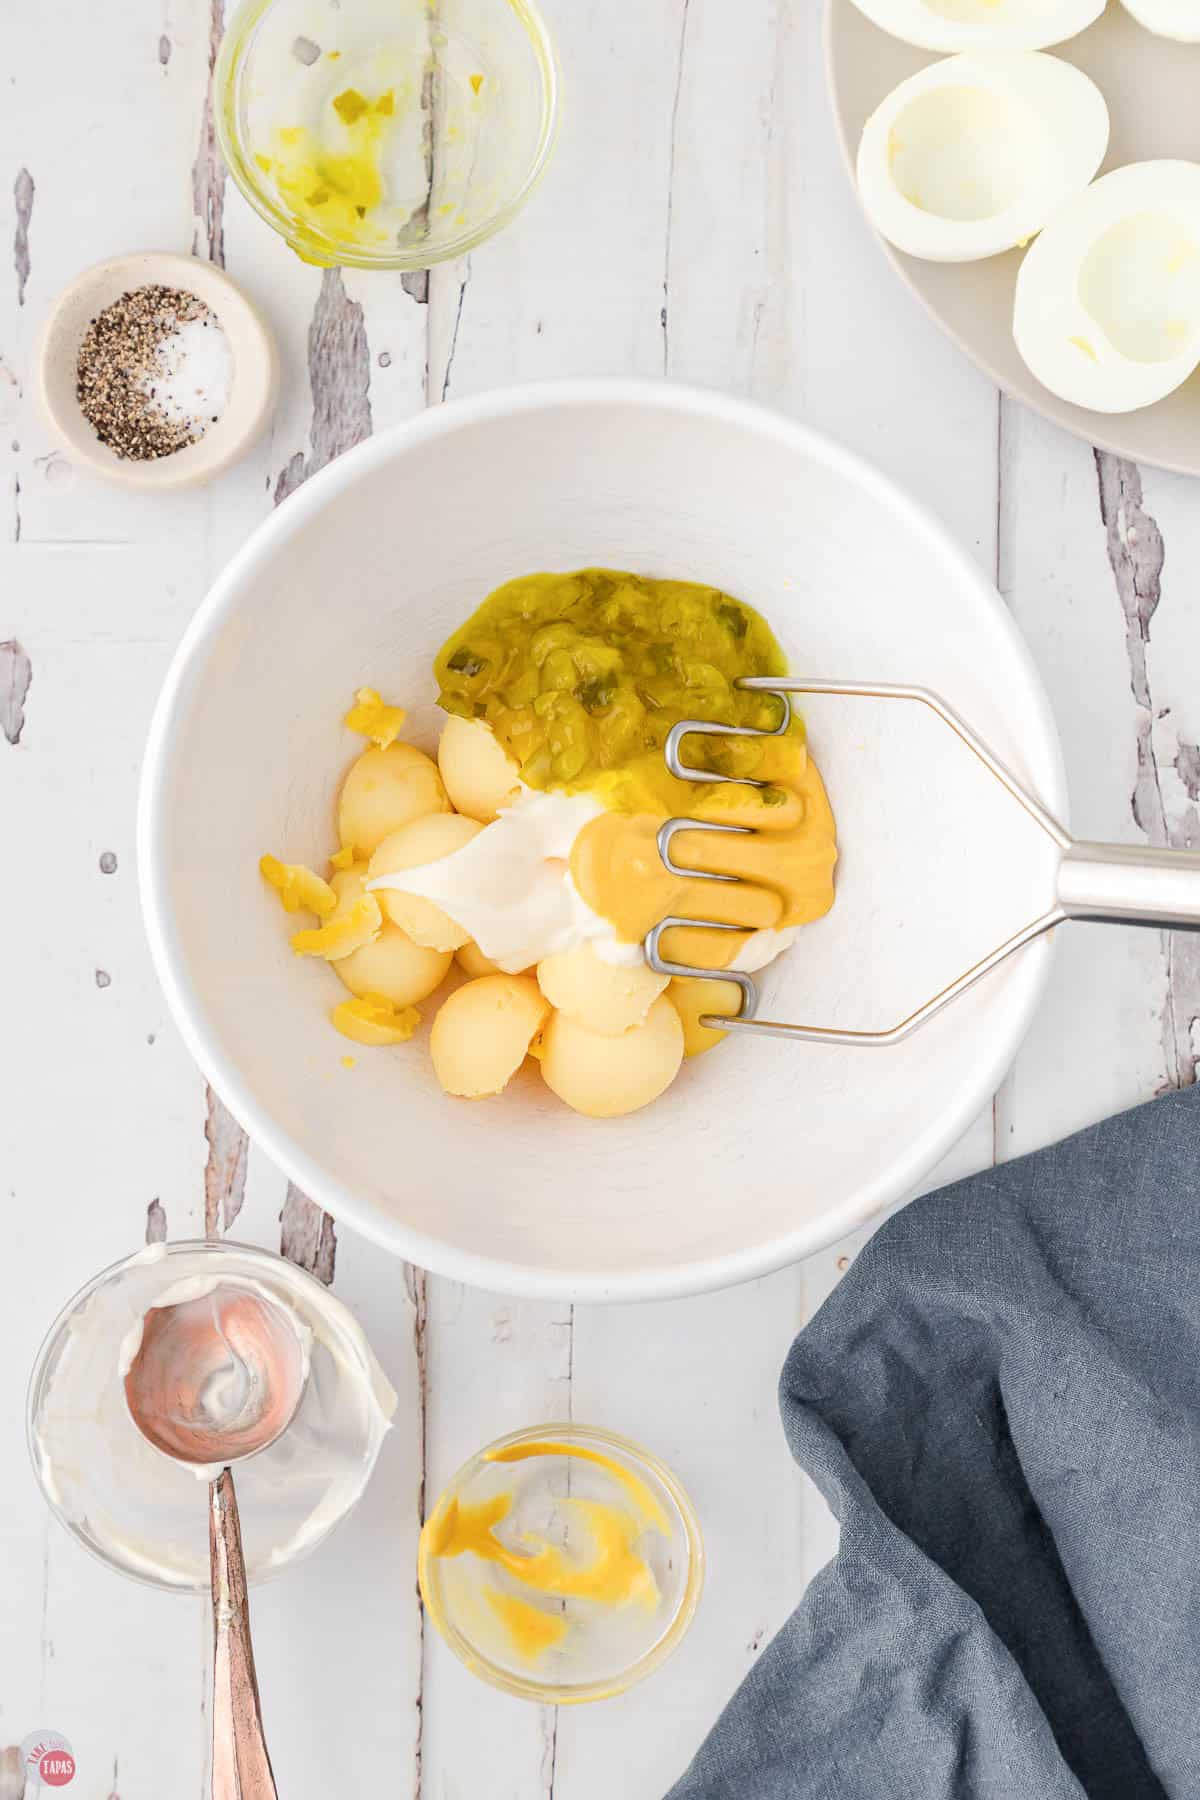 egg yolks, mayo, and relish in a bowl